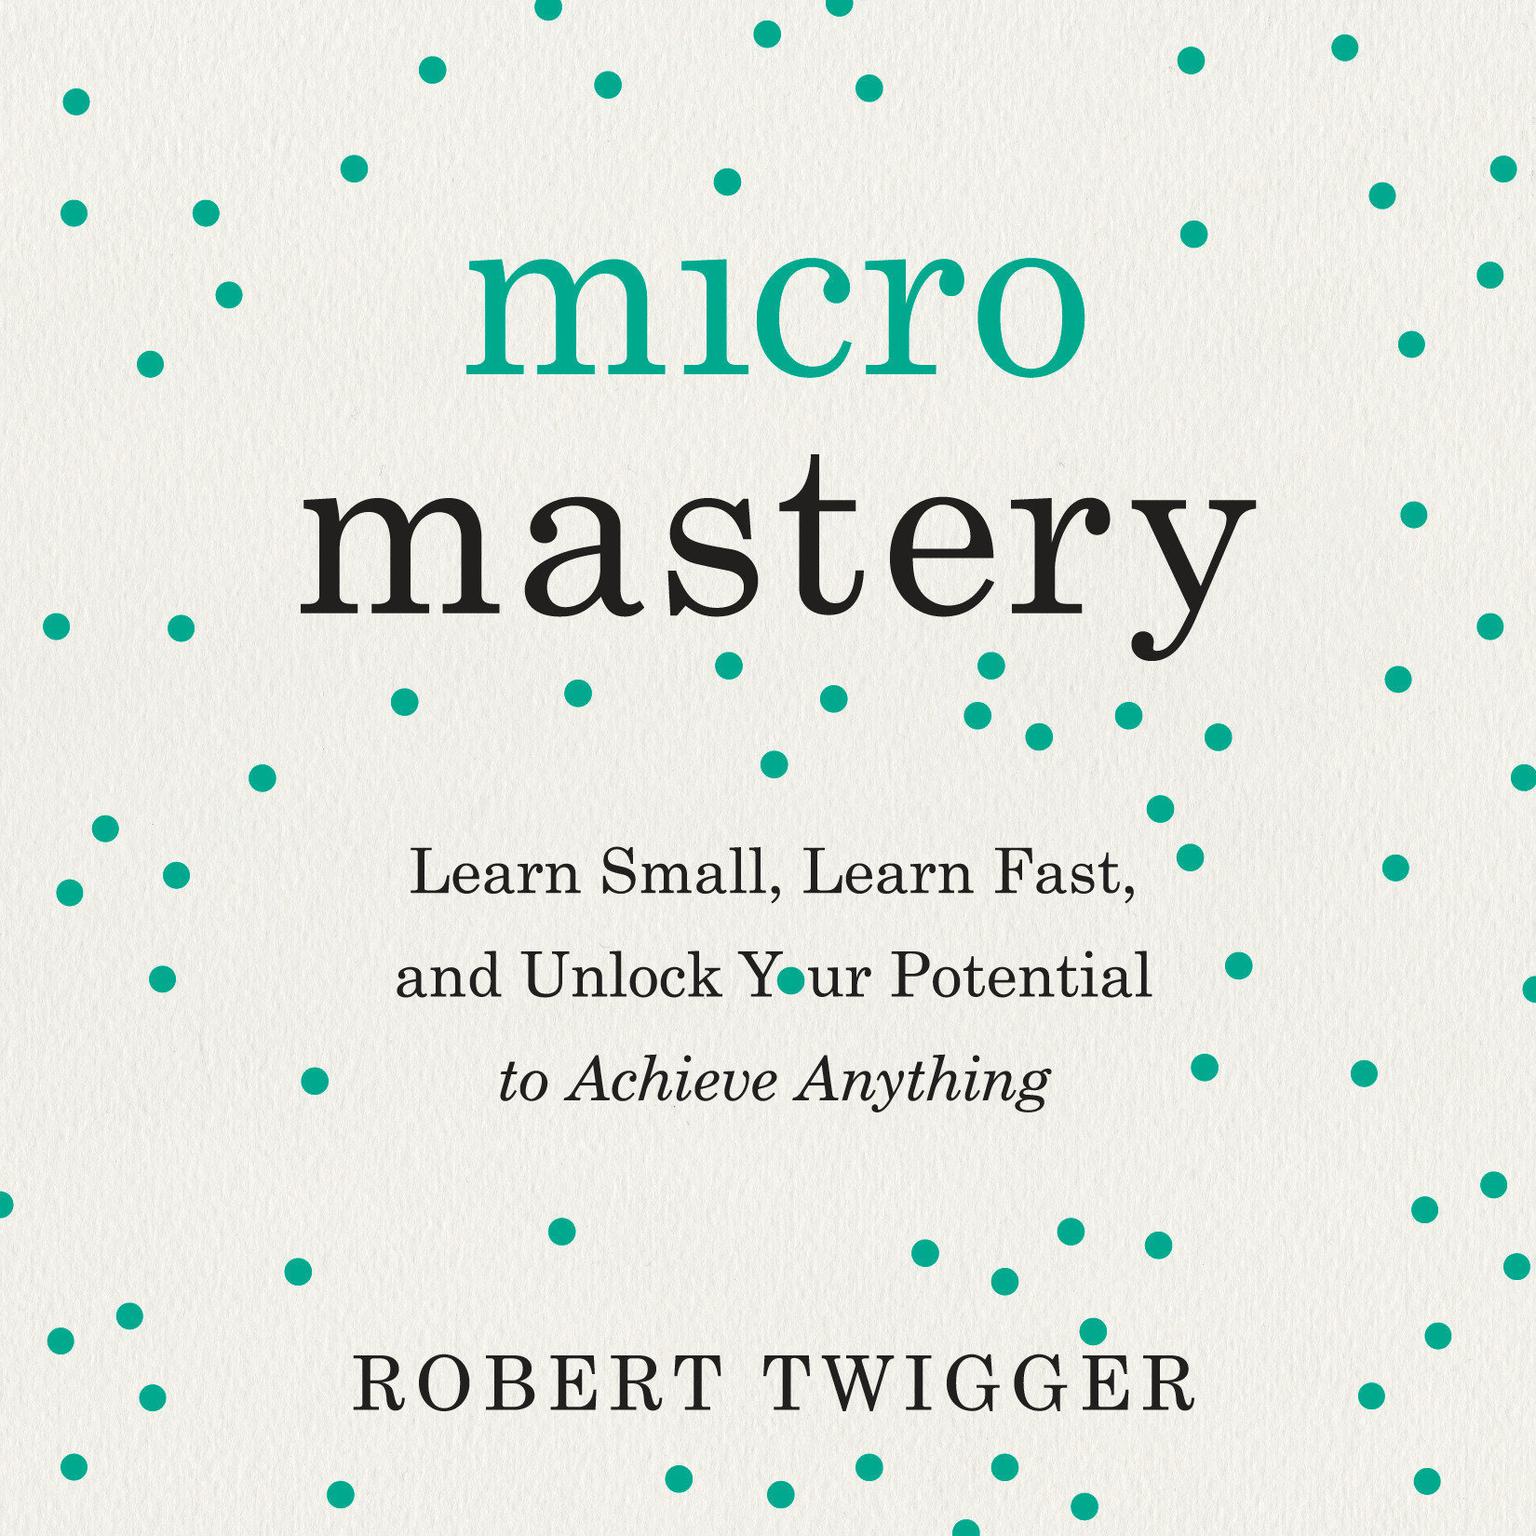 Micromastery: Learn Small, Learn Fast, and Unlock Your Potential to Achieve Anything Audiobook, by Robert Twigger